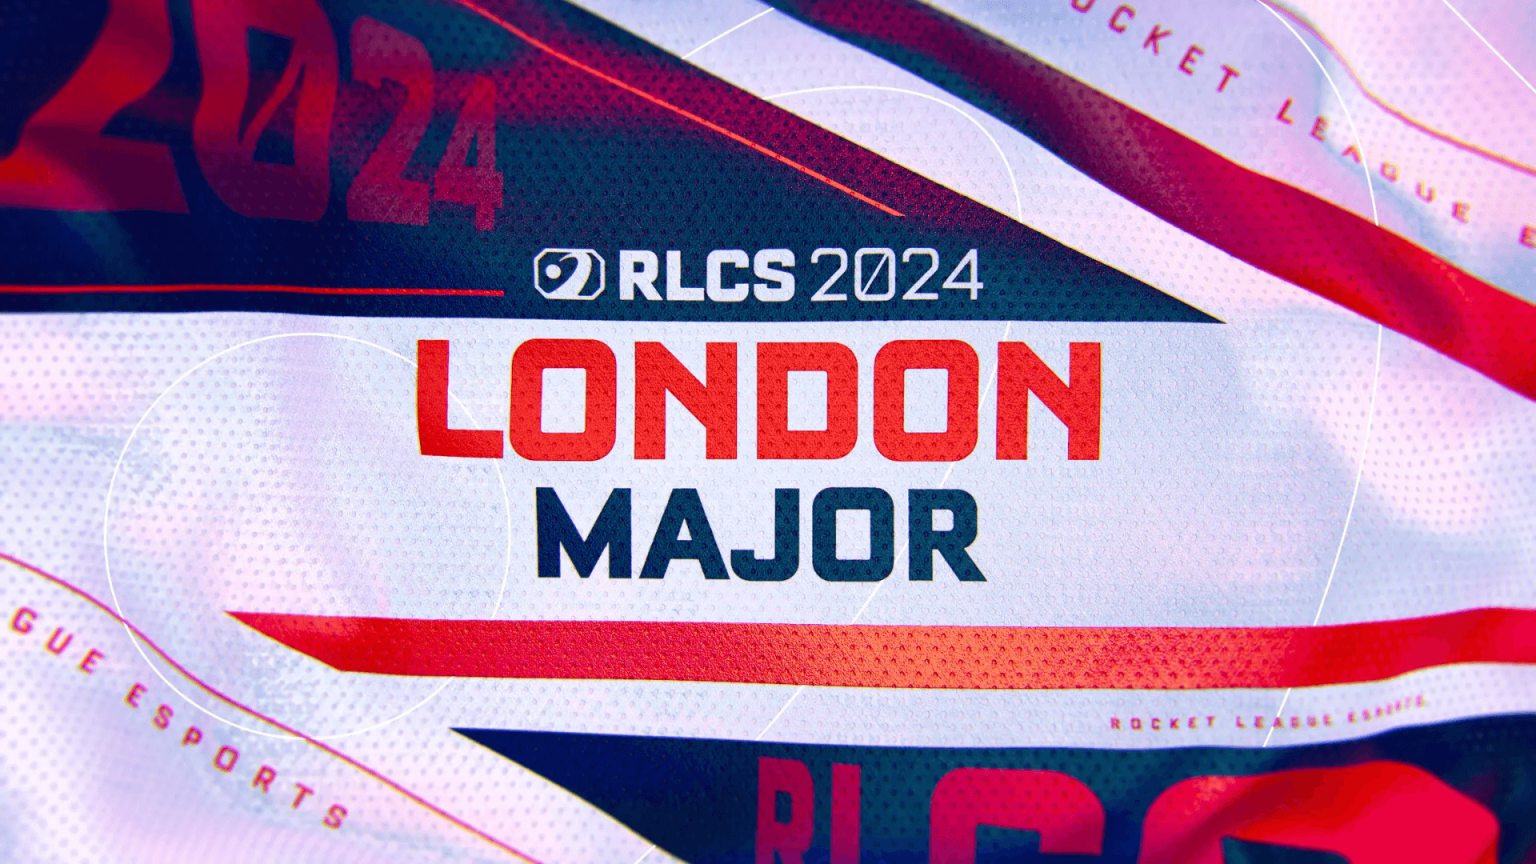 Rocket League RCLS returns to London for second Major of 2024